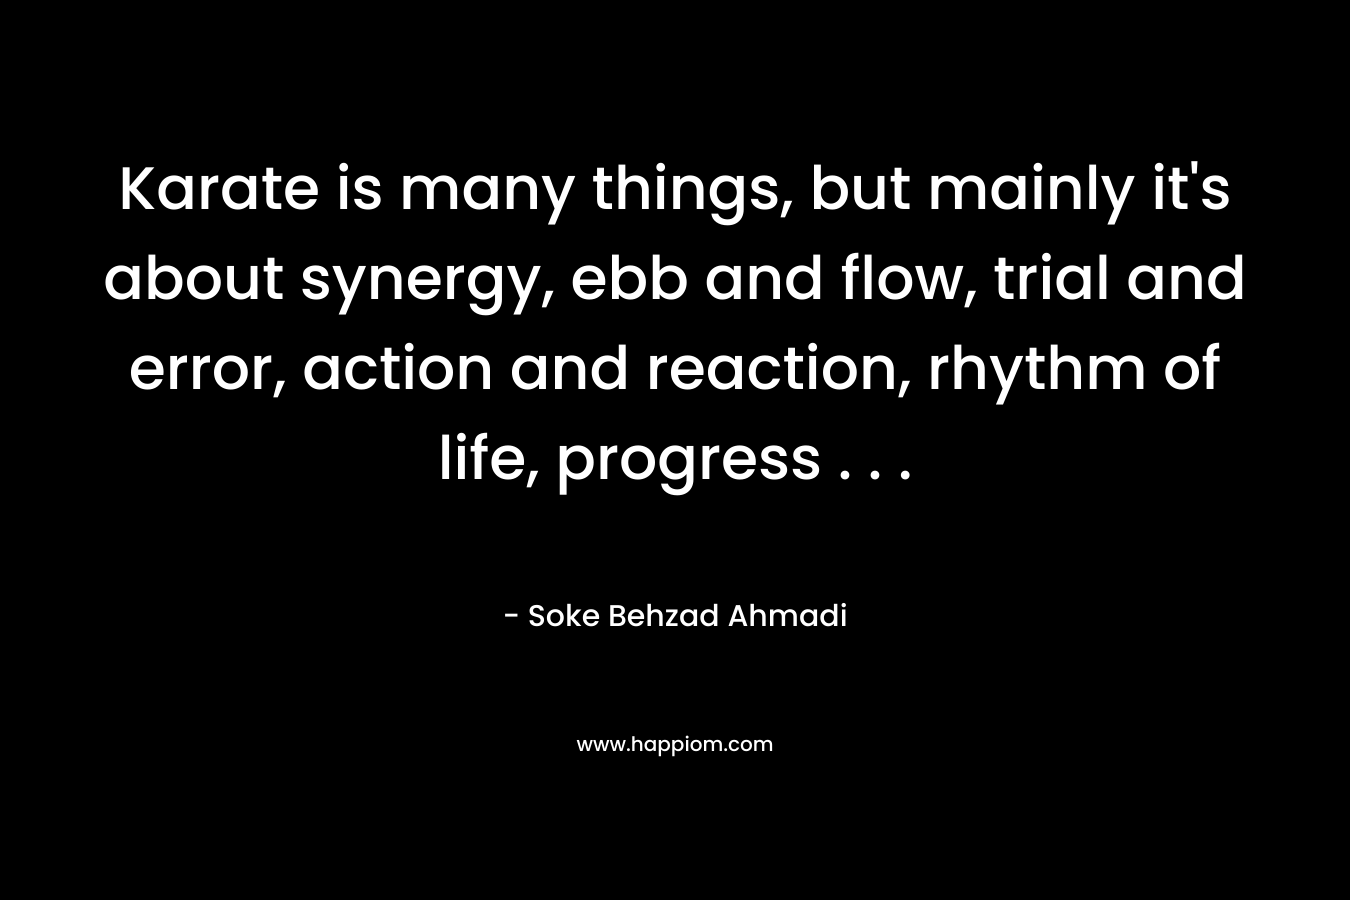 Karate is many things, but mainly it’s about synergy, ebb and flow, trial and error, action and reaction, rhythm of life, progress . . . – Soke Behzad Ahmadi